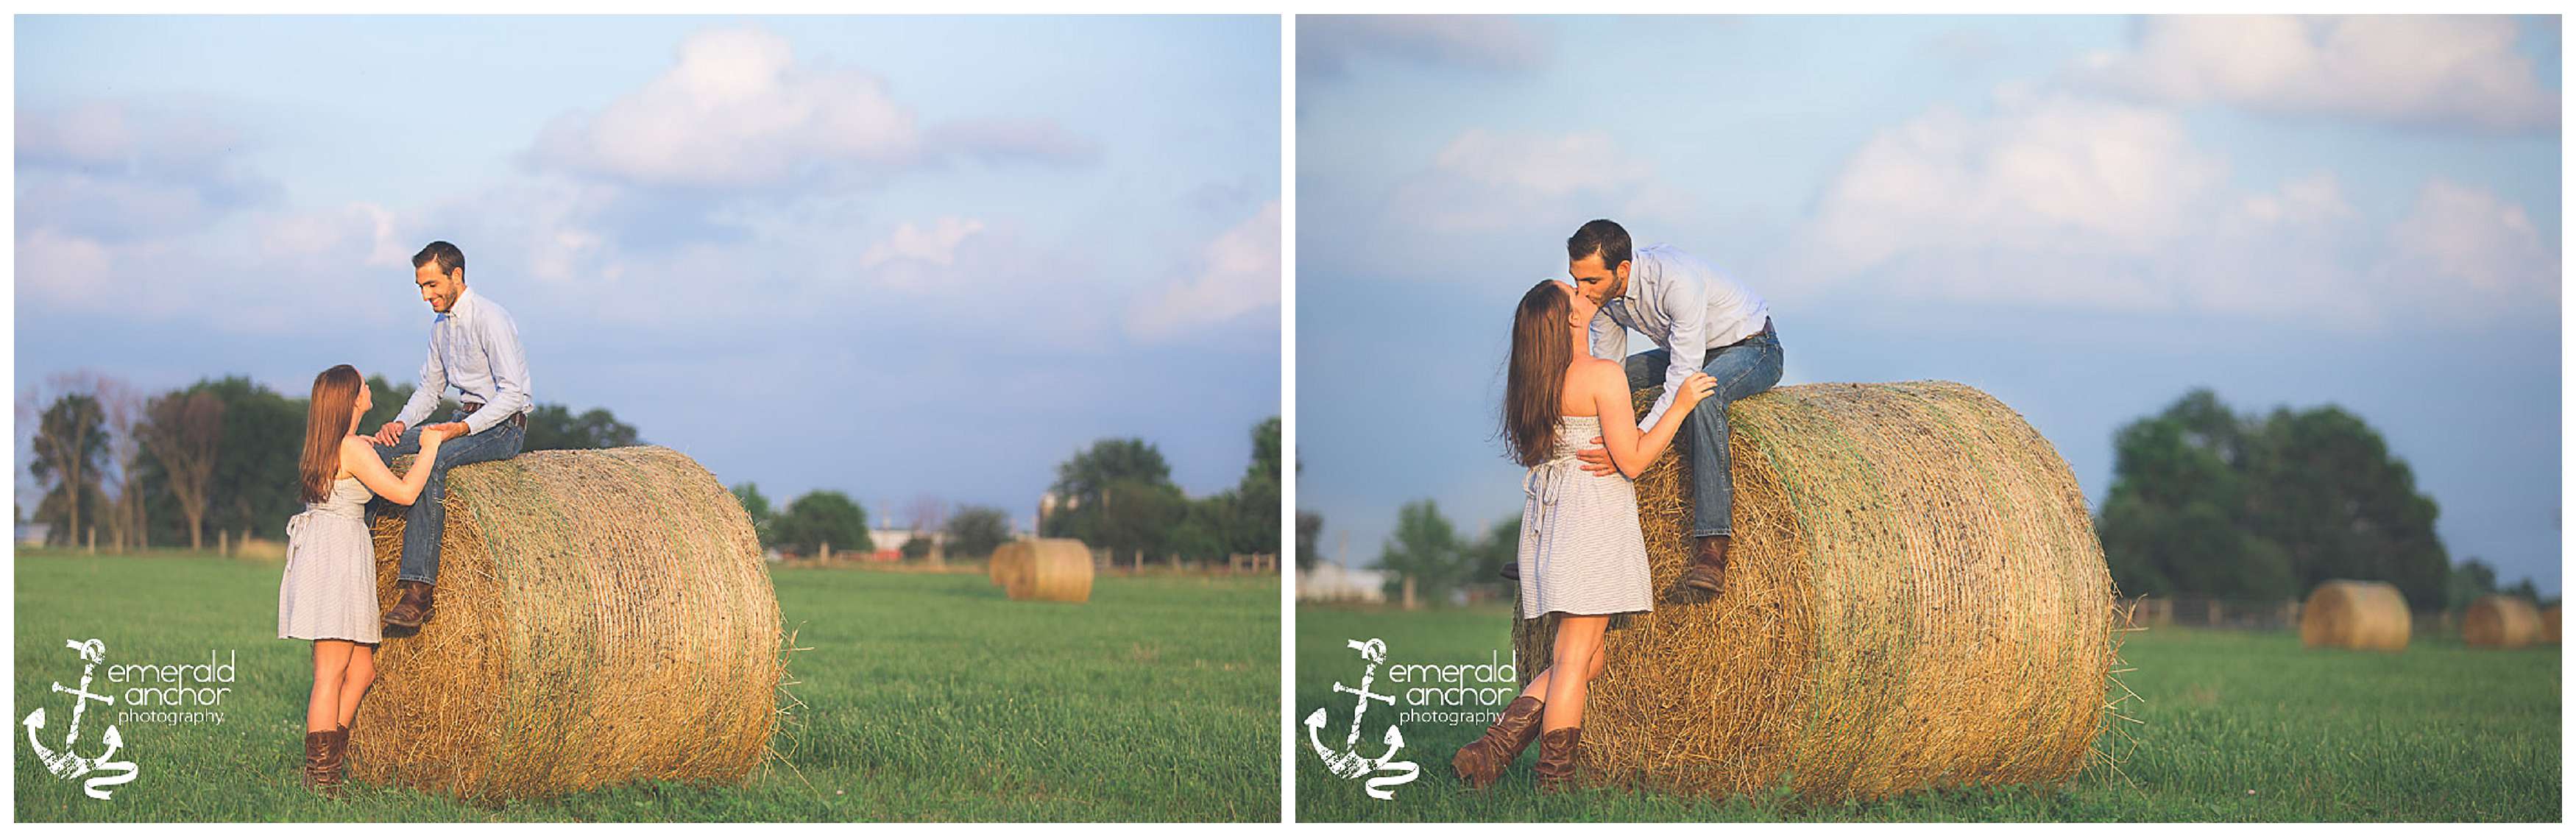 round bale hay field Engagement Photography Emerald Anchor Photography (10)